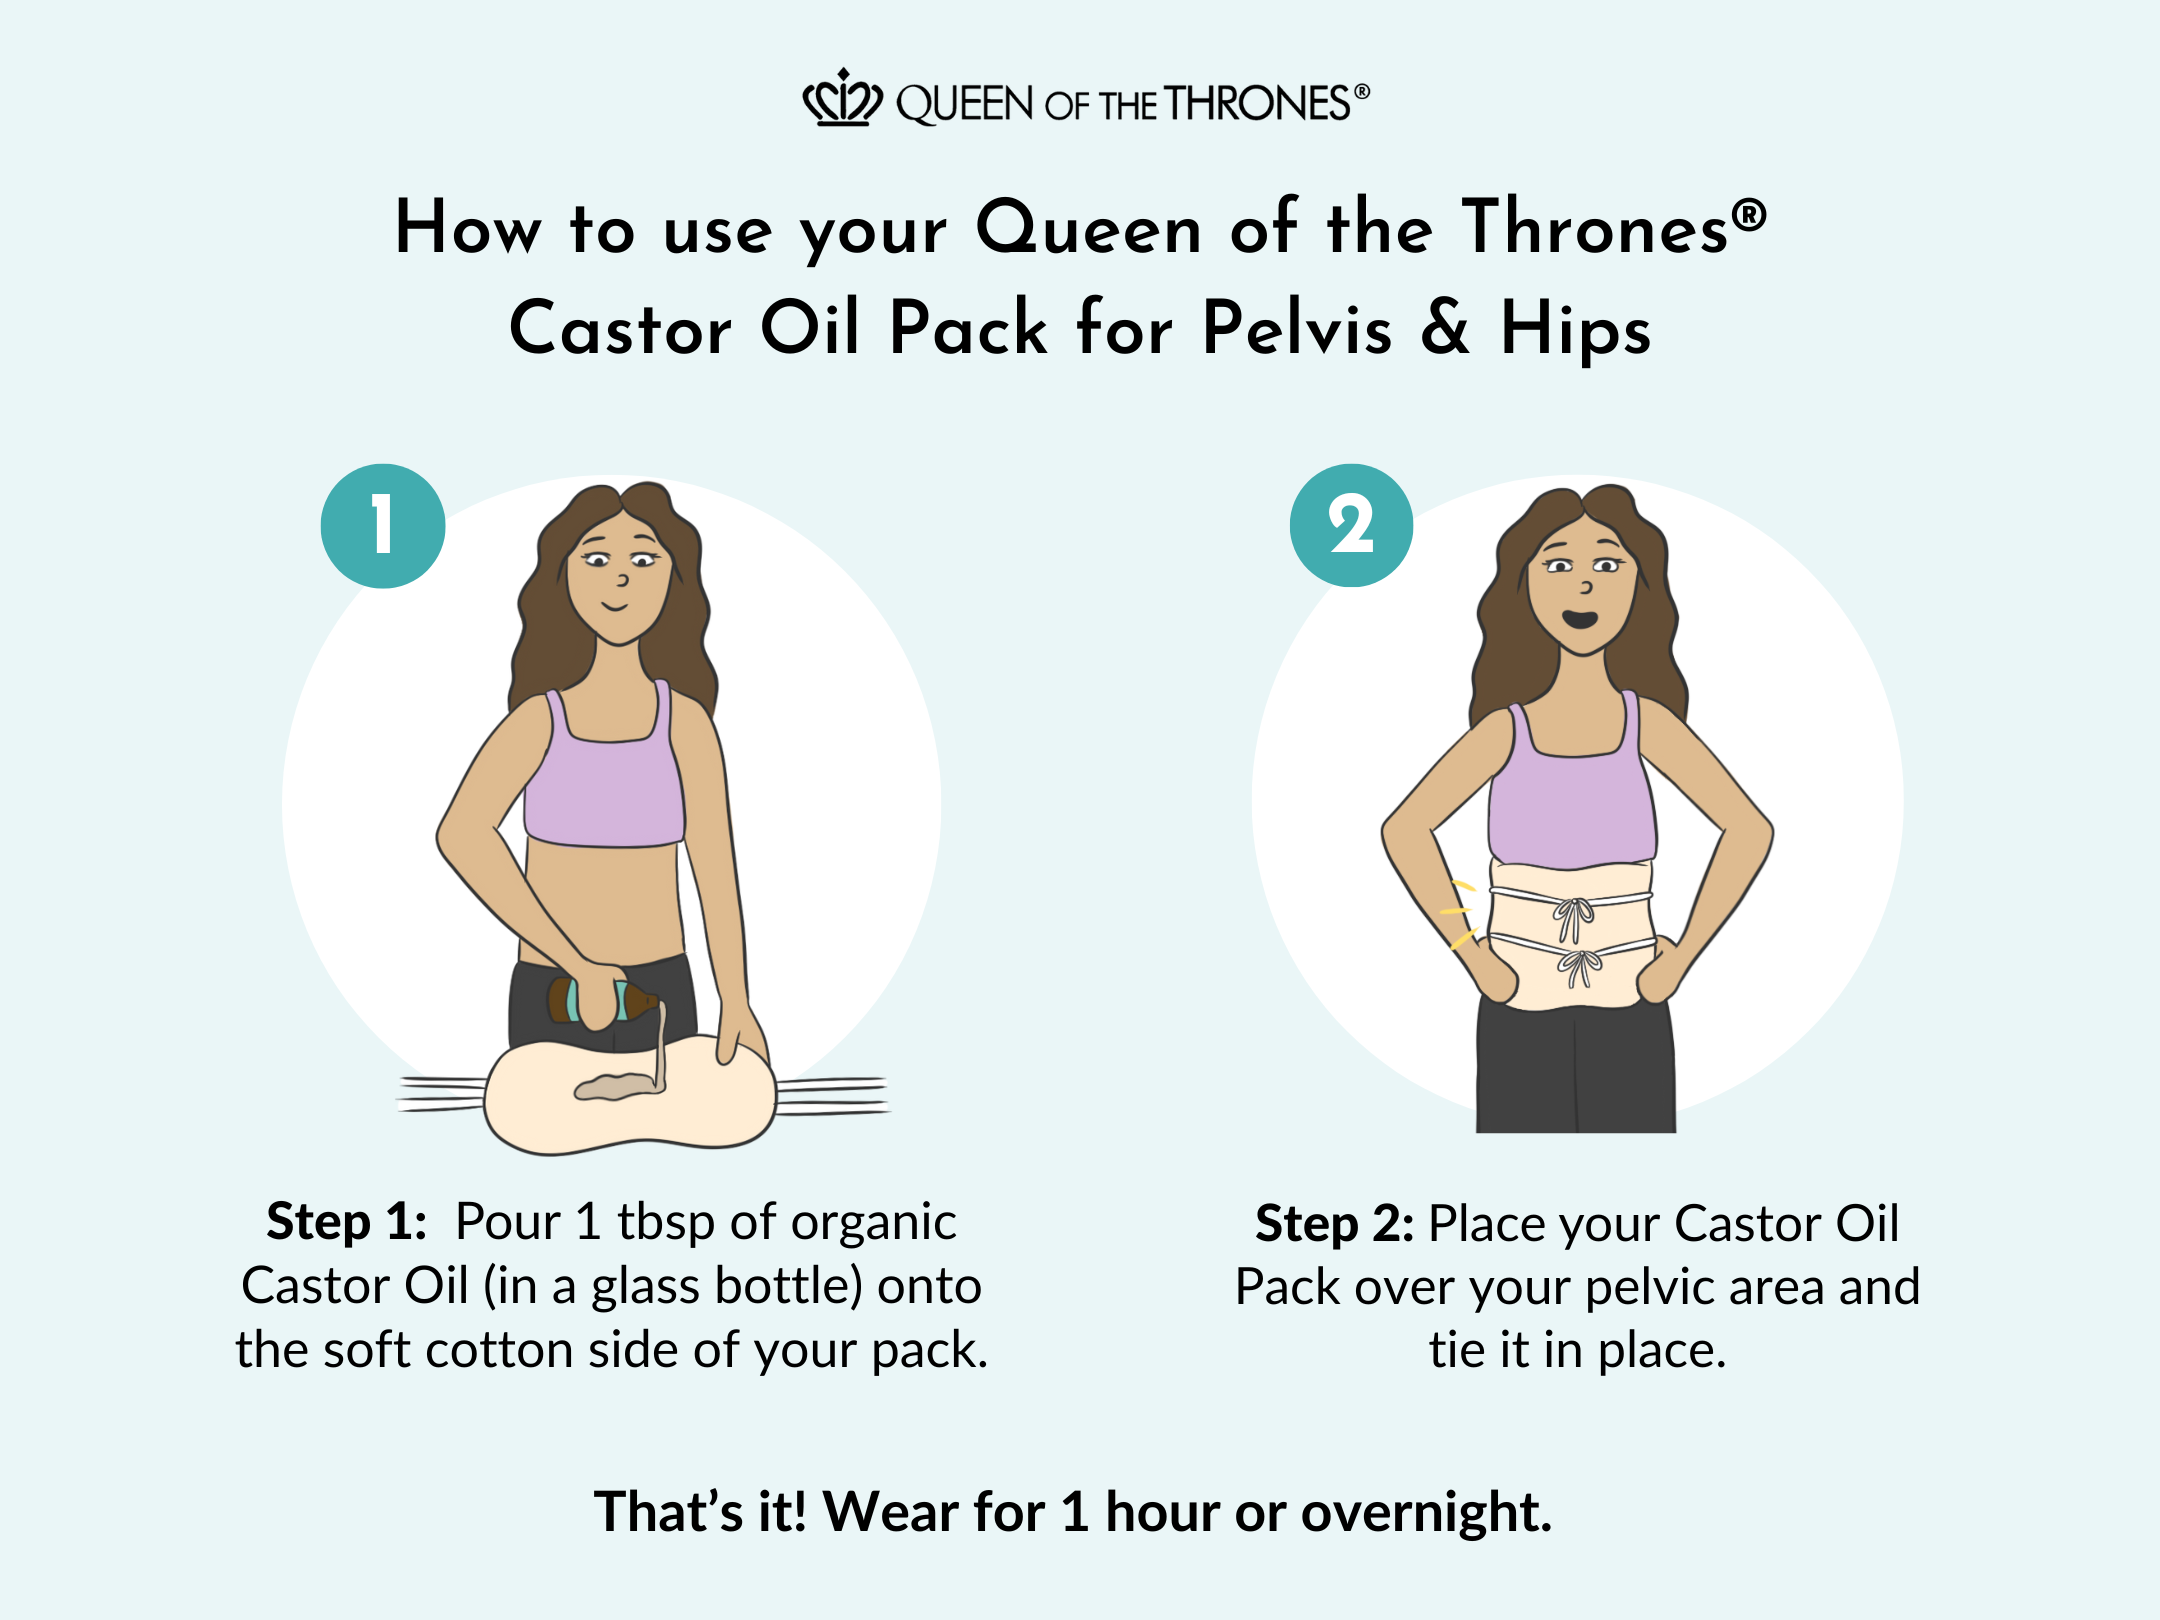 How to use your Queen of the Thrones Castor Oil Pack for Pelvis